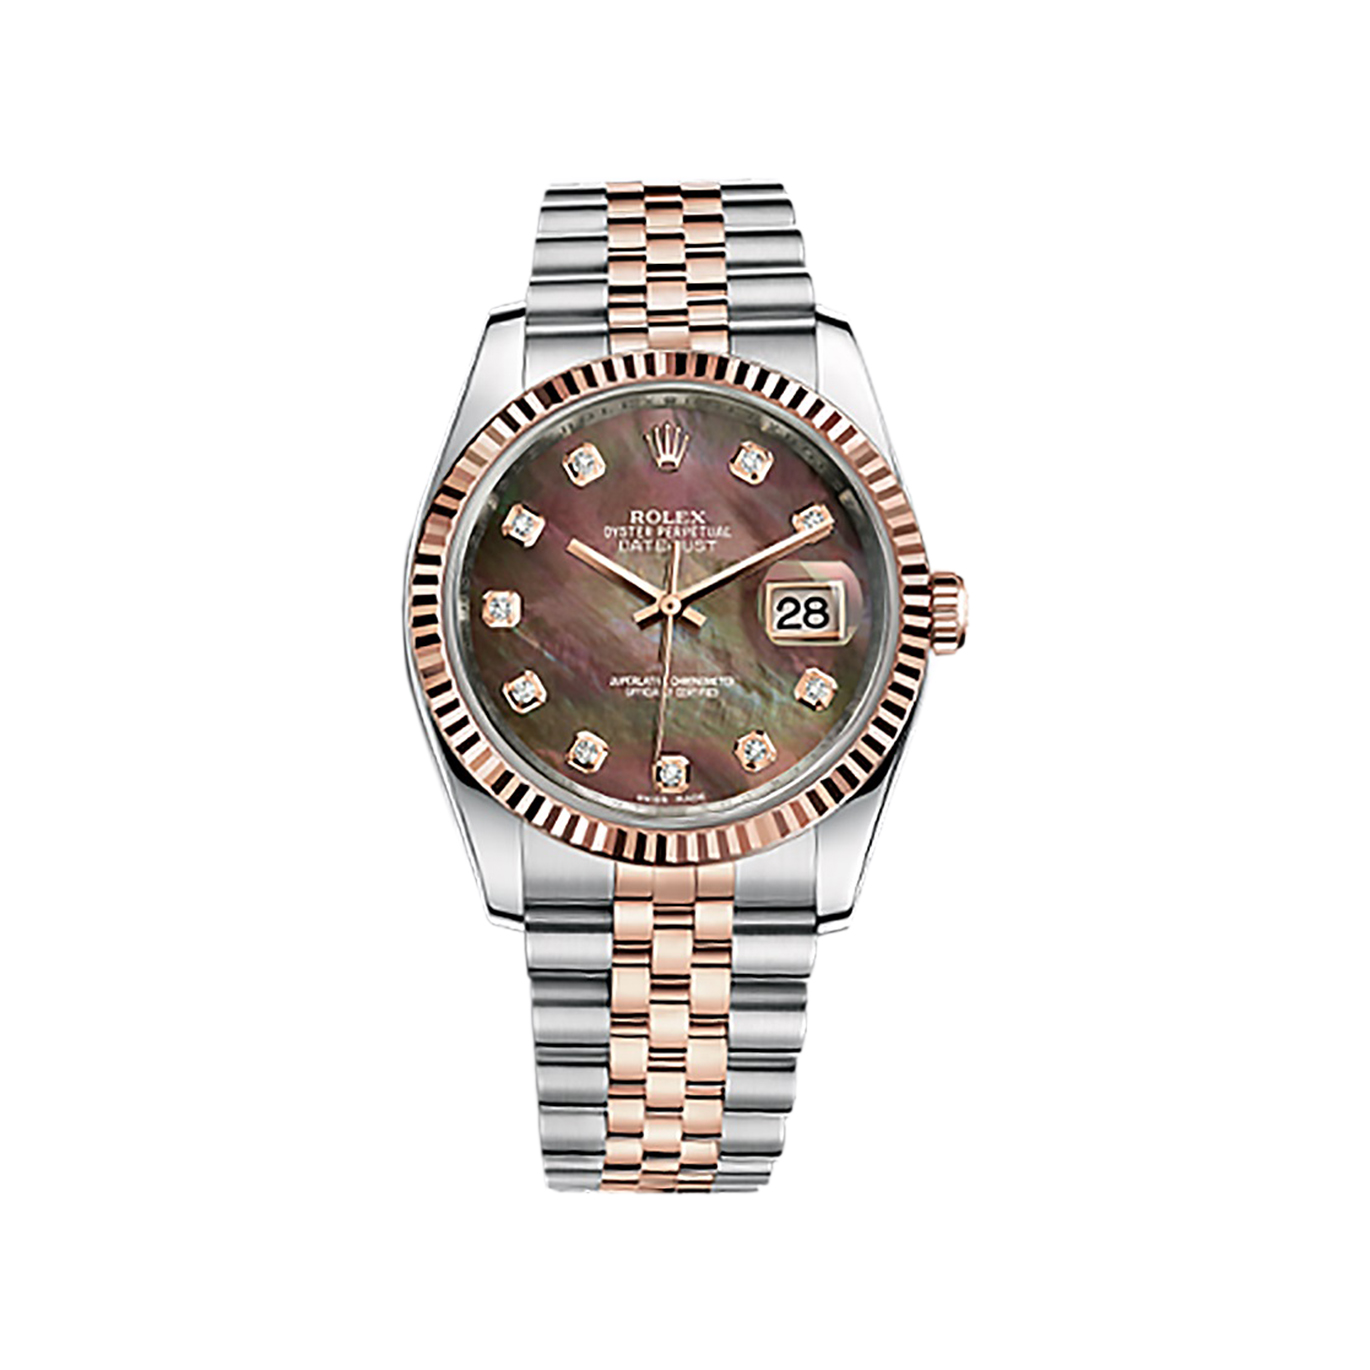 Datejust 36 116231 Rose Gold & Stainless Steel Watch (Black Mother-of-Pearl Set with Diamonds) - Click Image to Close